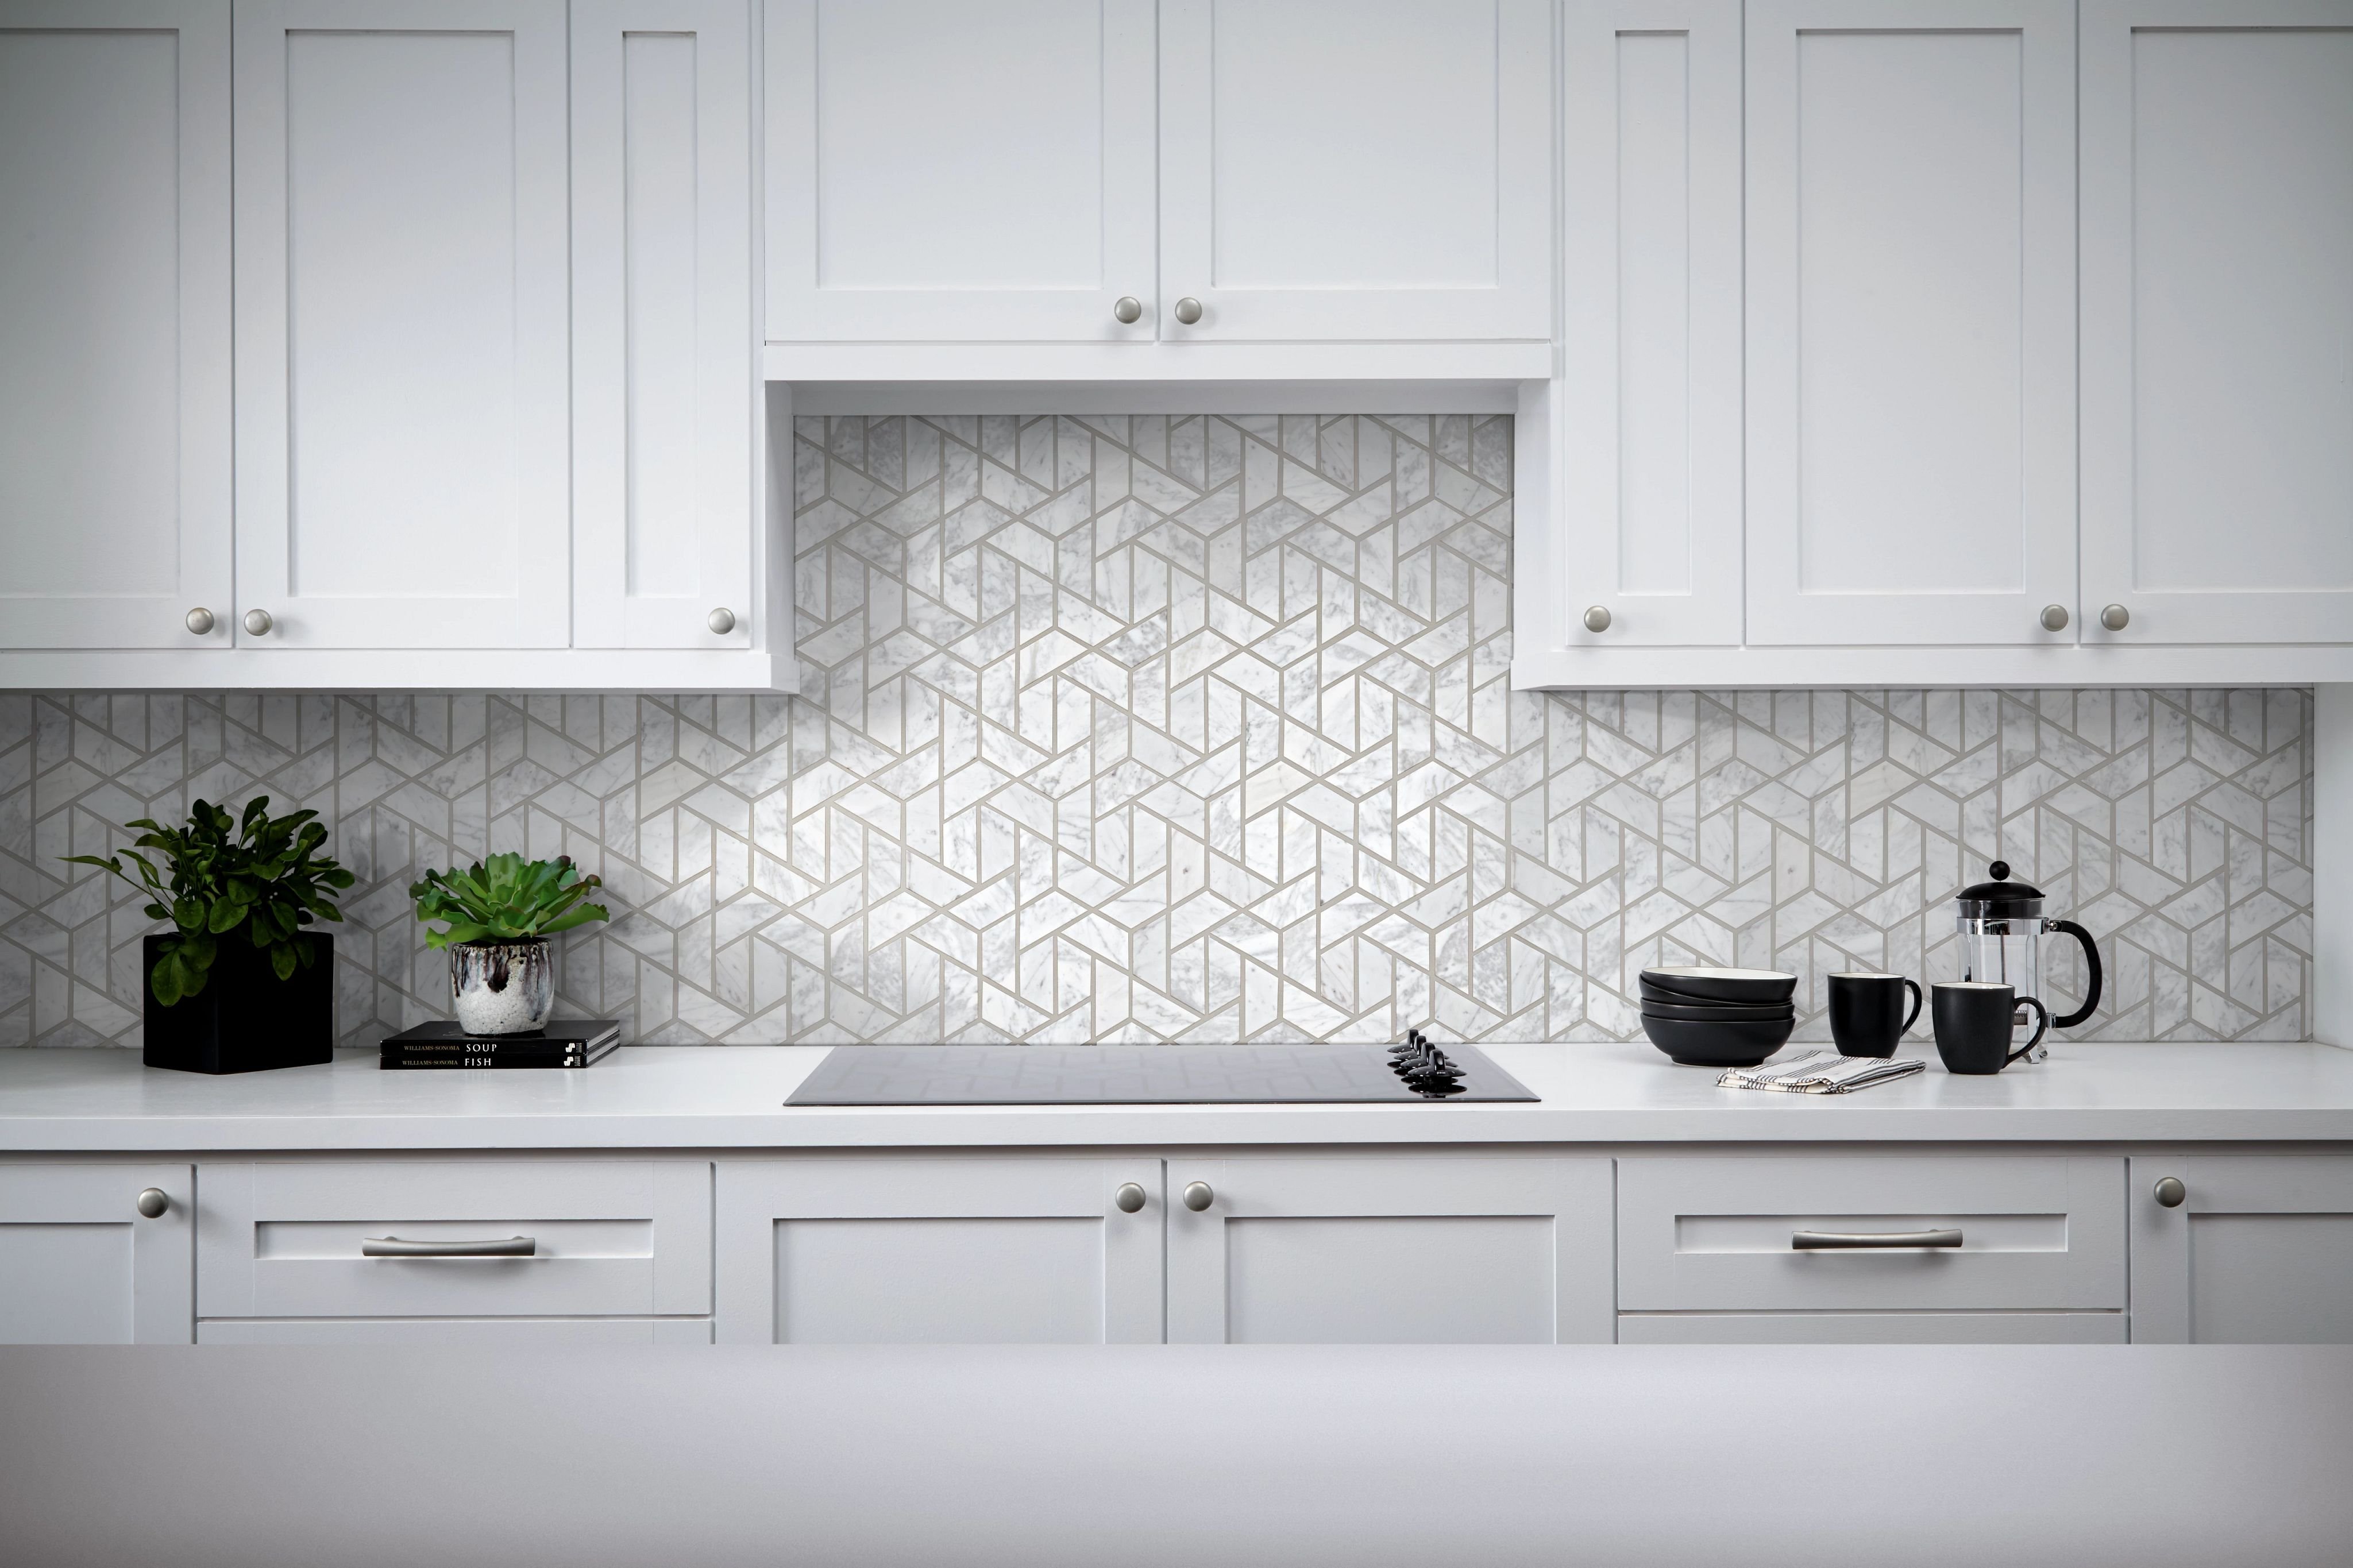 white kitchen countertop and oven with a tiled backsplash from Richardson’s Carpet Service in the Williamsburg, VA area